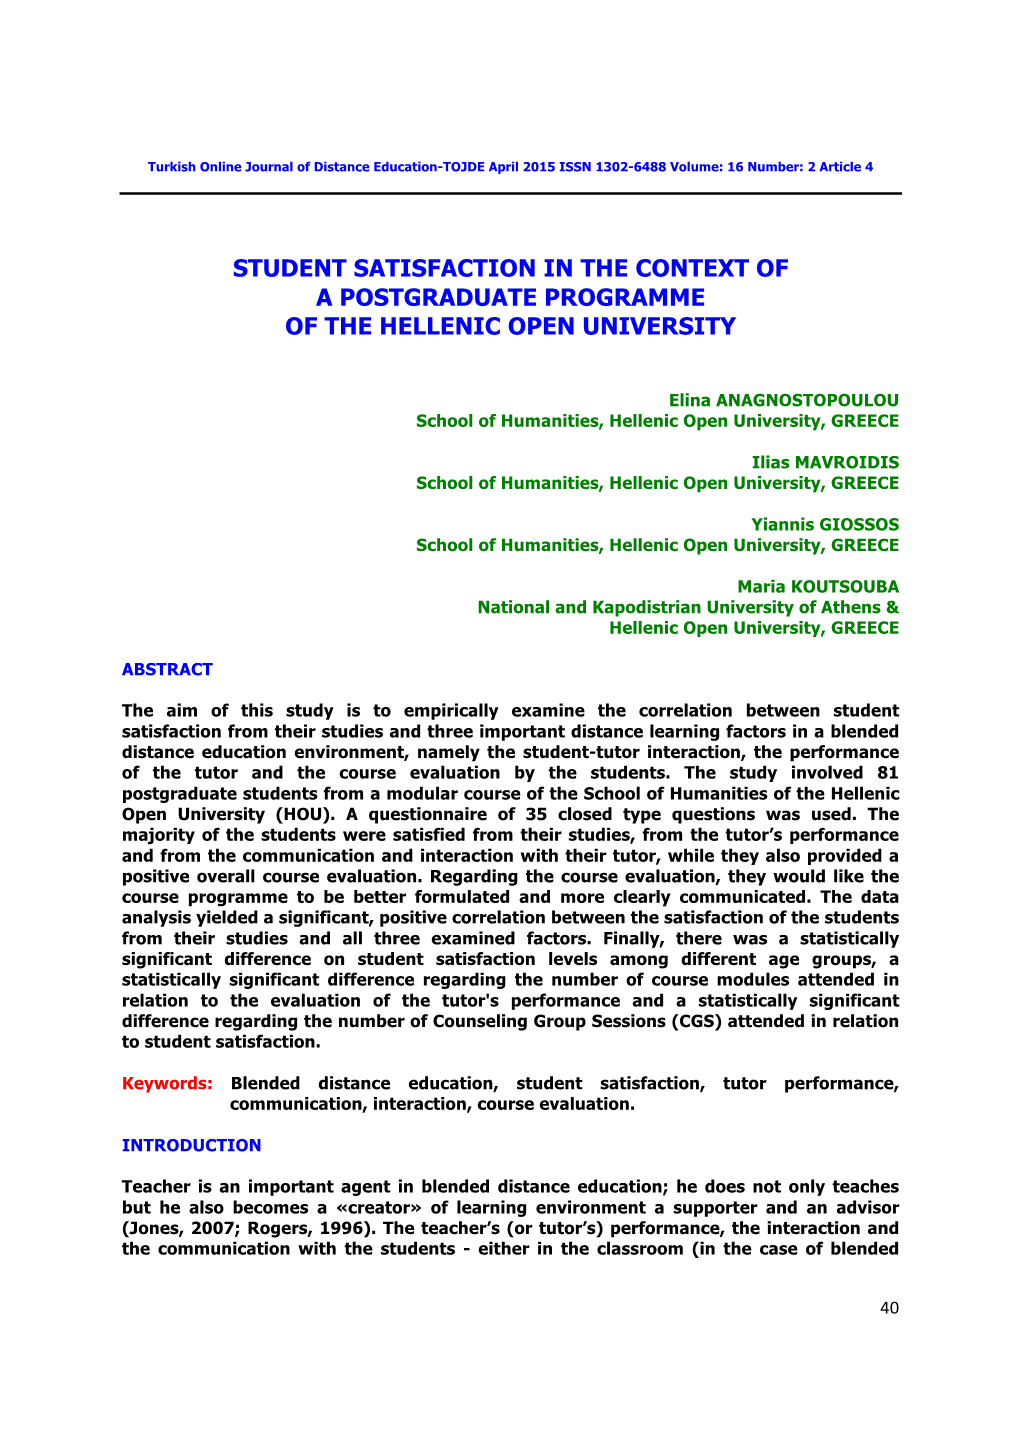 Student Satisfaction in the Context of a Postgraduate Programme of the Hellenic Open University